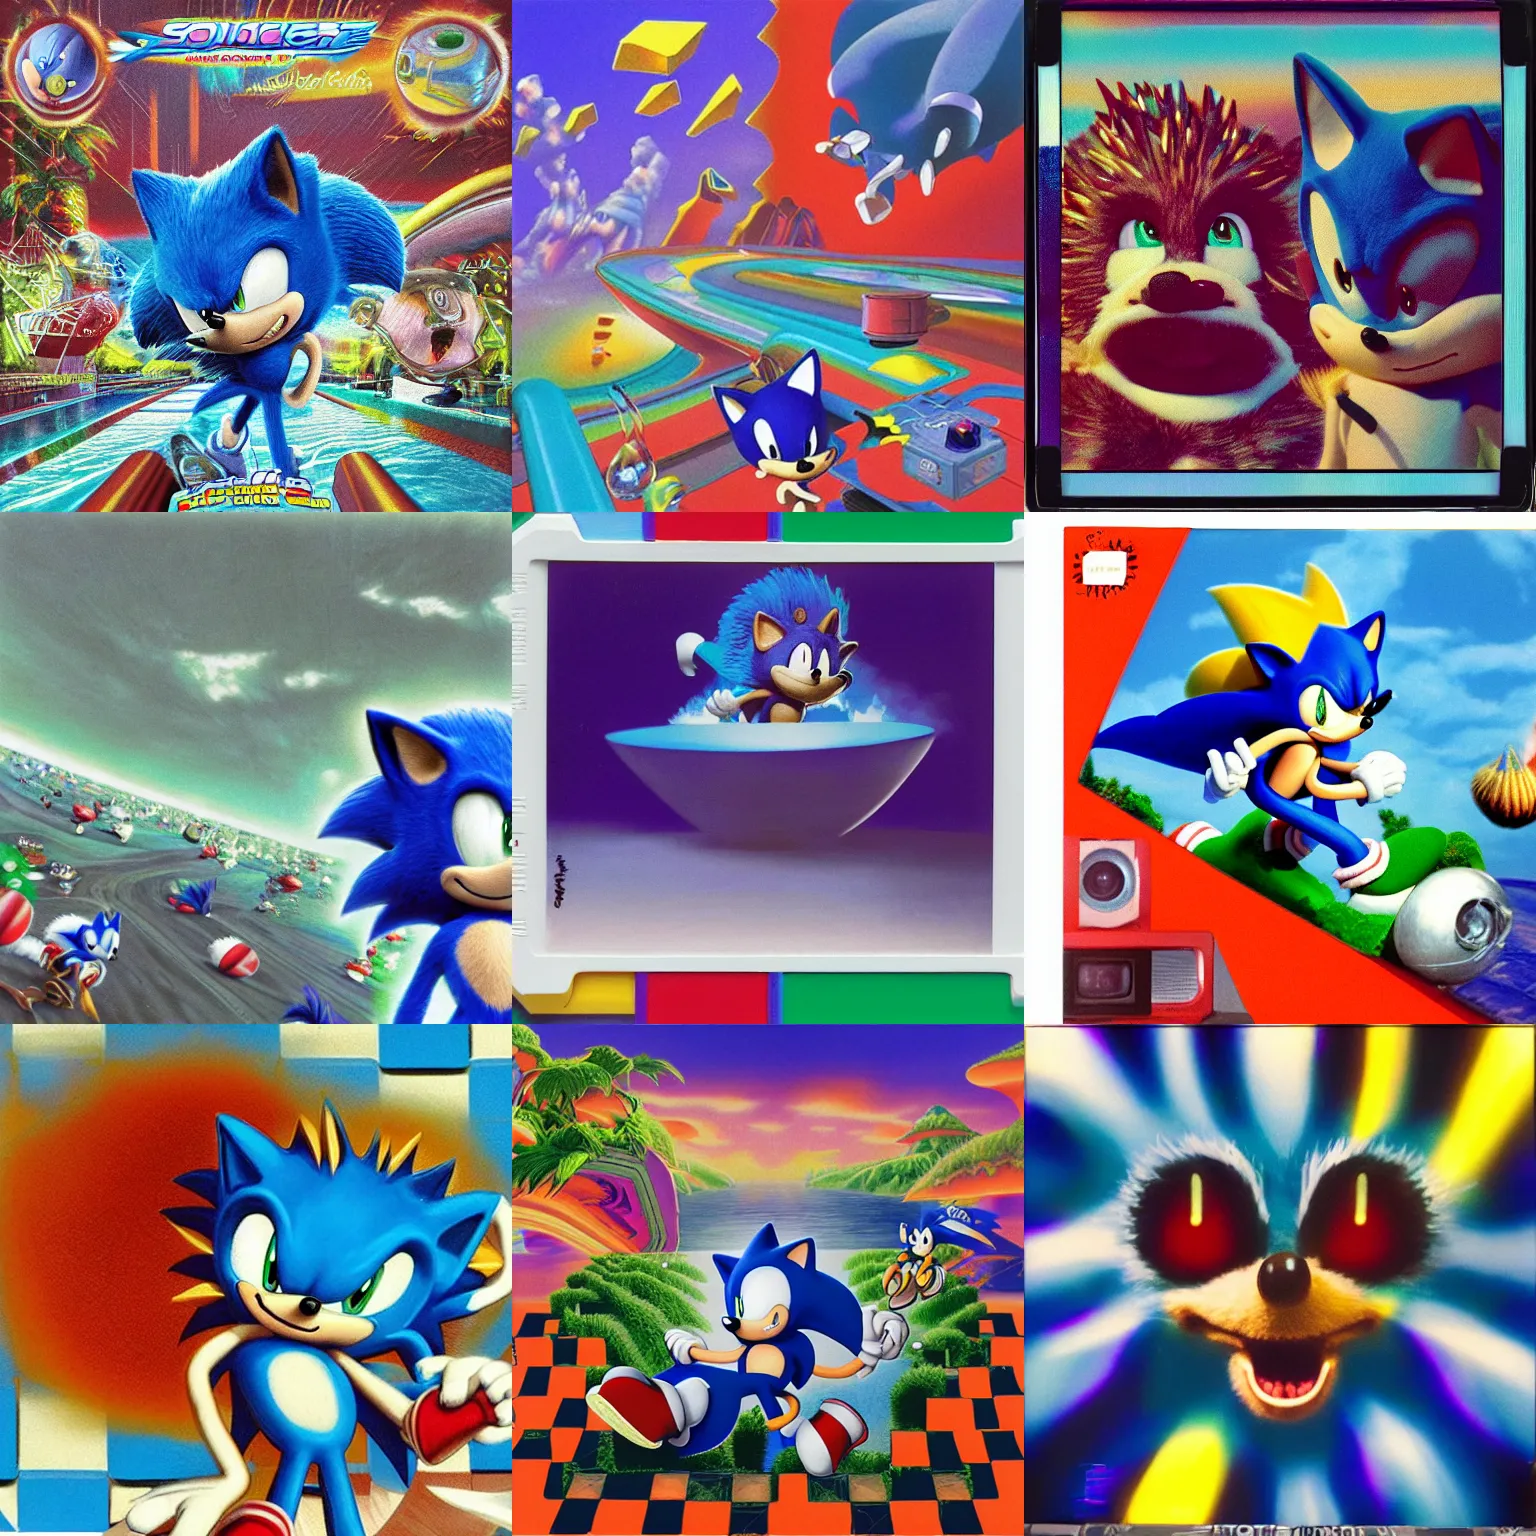 Prompt: polaroid portrait of sonic hedgehog and a matte painting landscape of a surreal, sharp, detailed professional, soft pastels, high quality airbrush art album cover of a liquid dissolving airbrush art lsd dmt sonic the hedgehog swimming through cyberspace, iridescent checkerboard background, 1 9 8 0 s 1 9 9 8 sega genesis rareware video game album cover